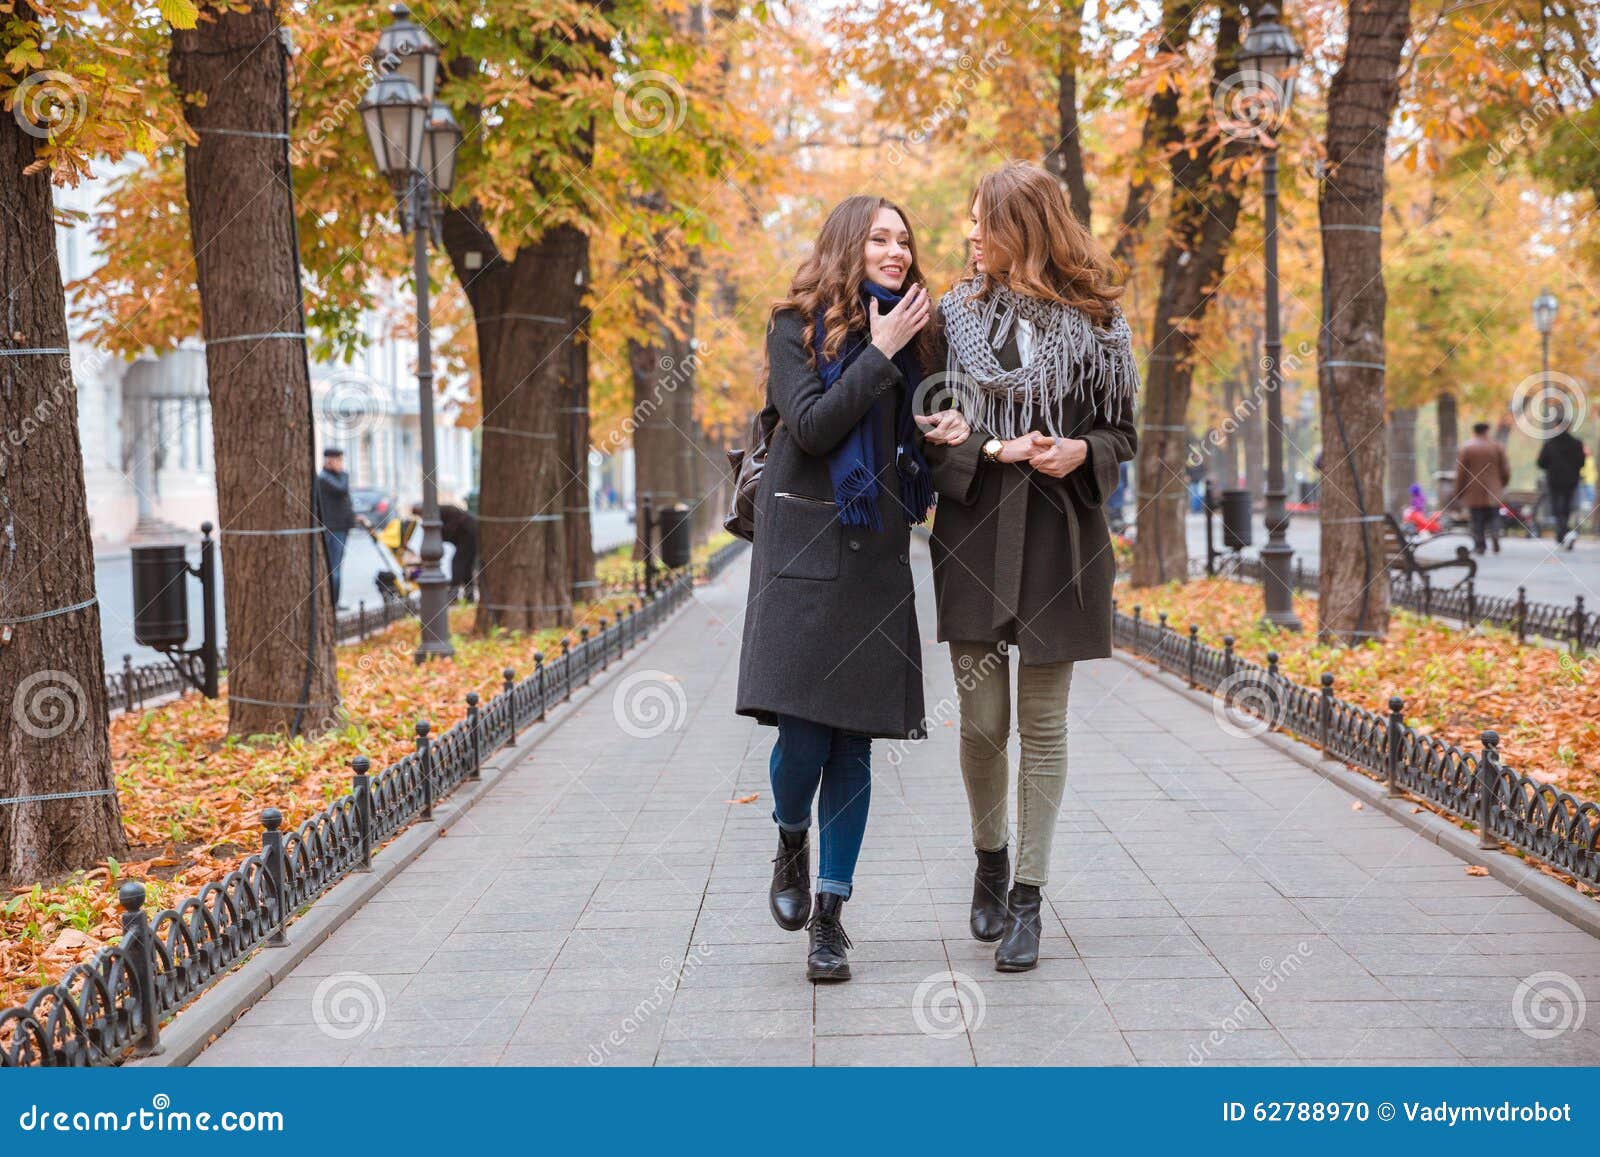 Two Girlfriends Walking and Talking Outdoors Stock Photo - Image of ...